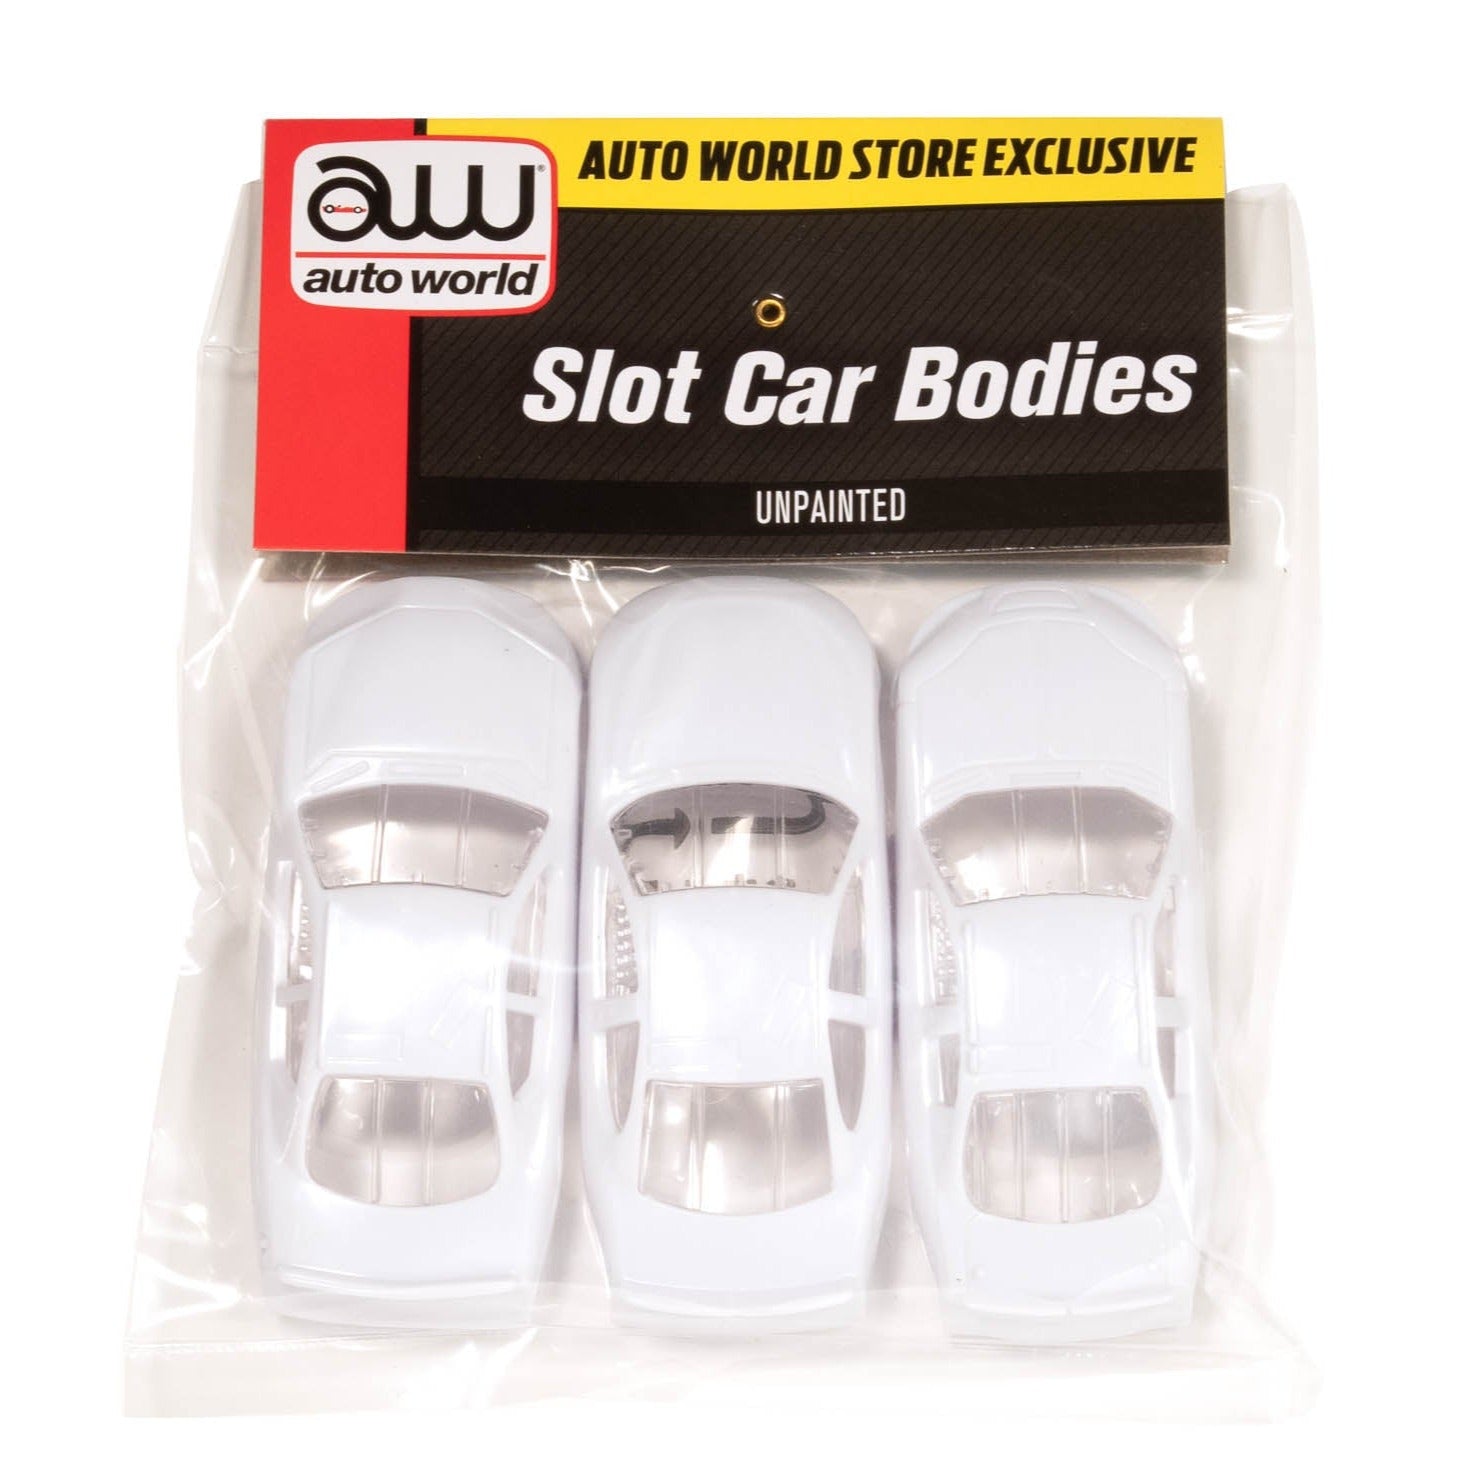 Auto World Super III '08 Stock Car HO Scale Unpainted Bodies (3-pack)